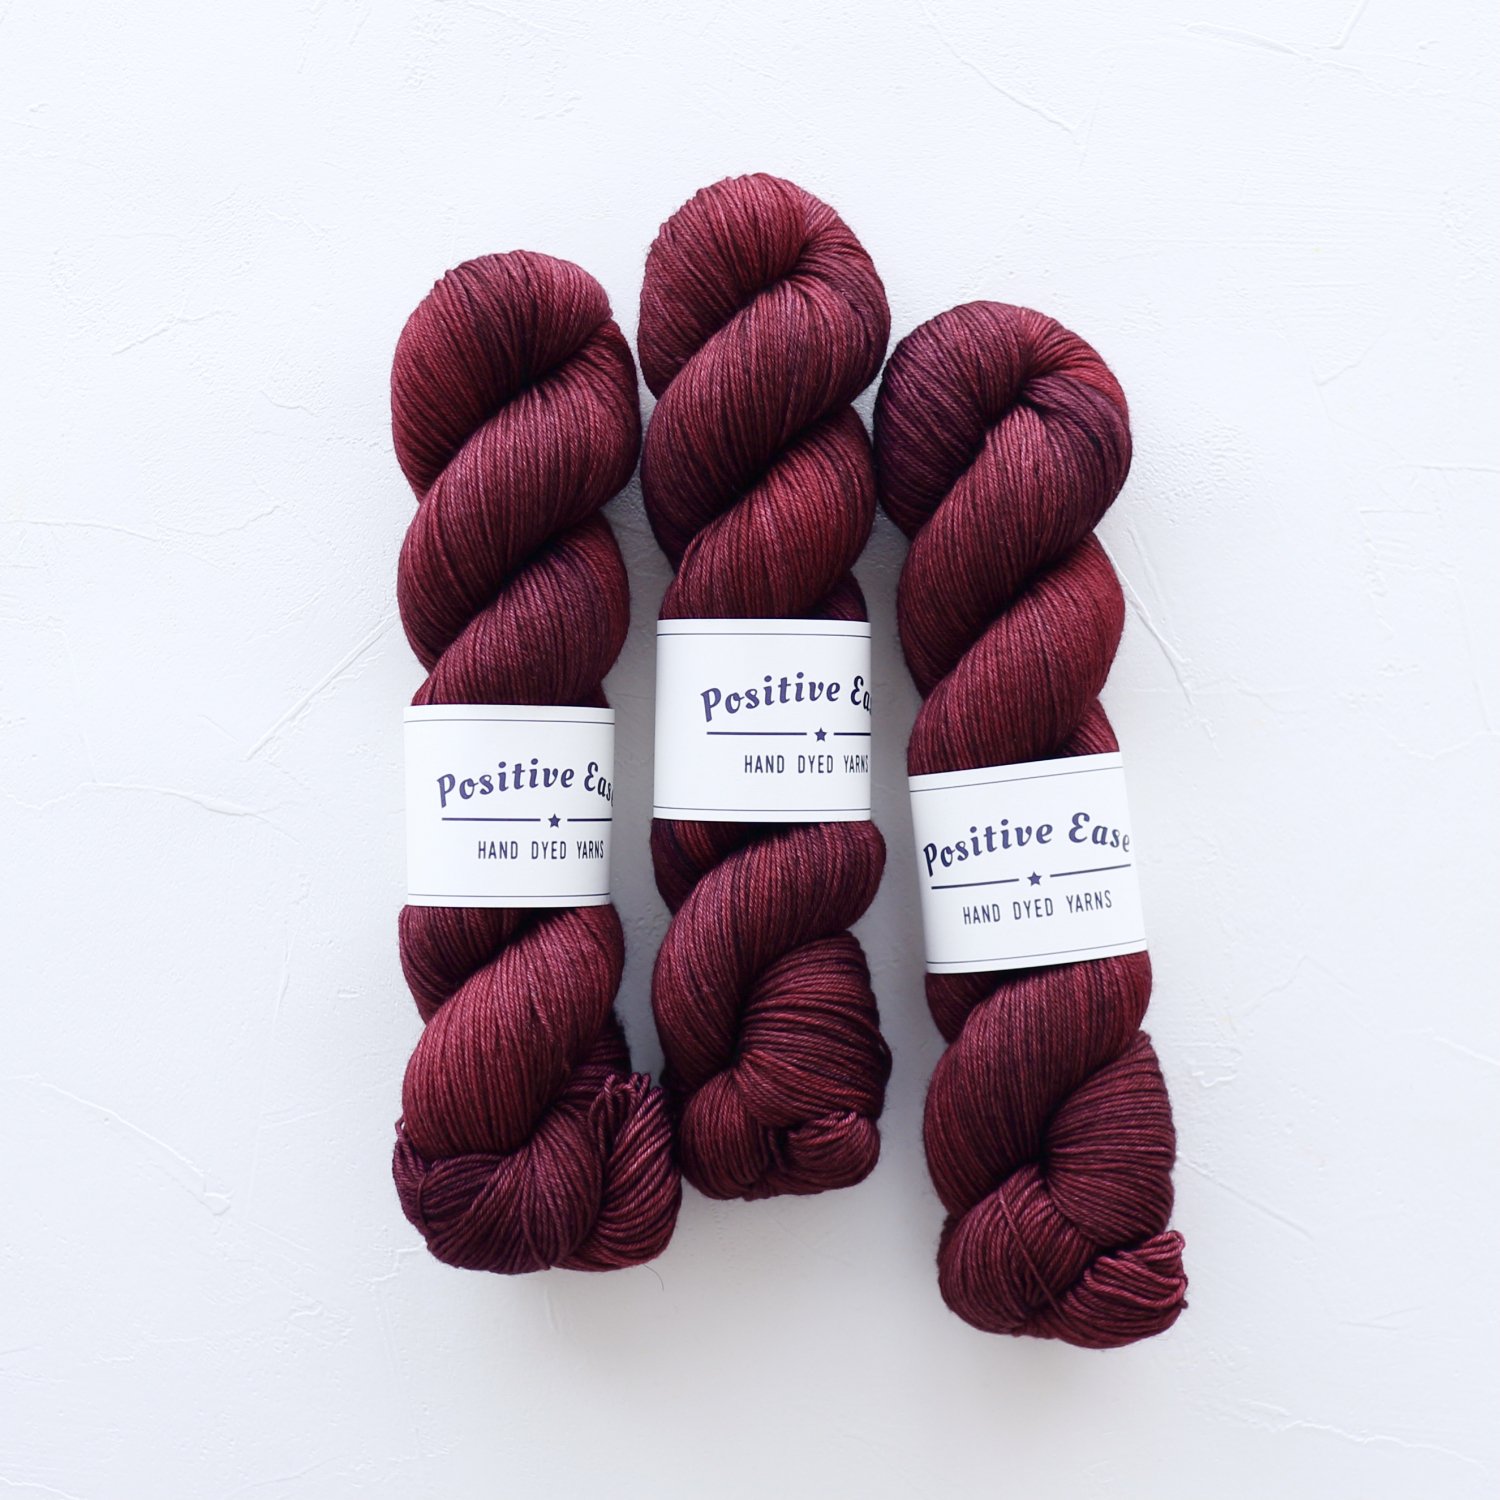 Positive Ease<br>Pure Merino<br>Great Expectations